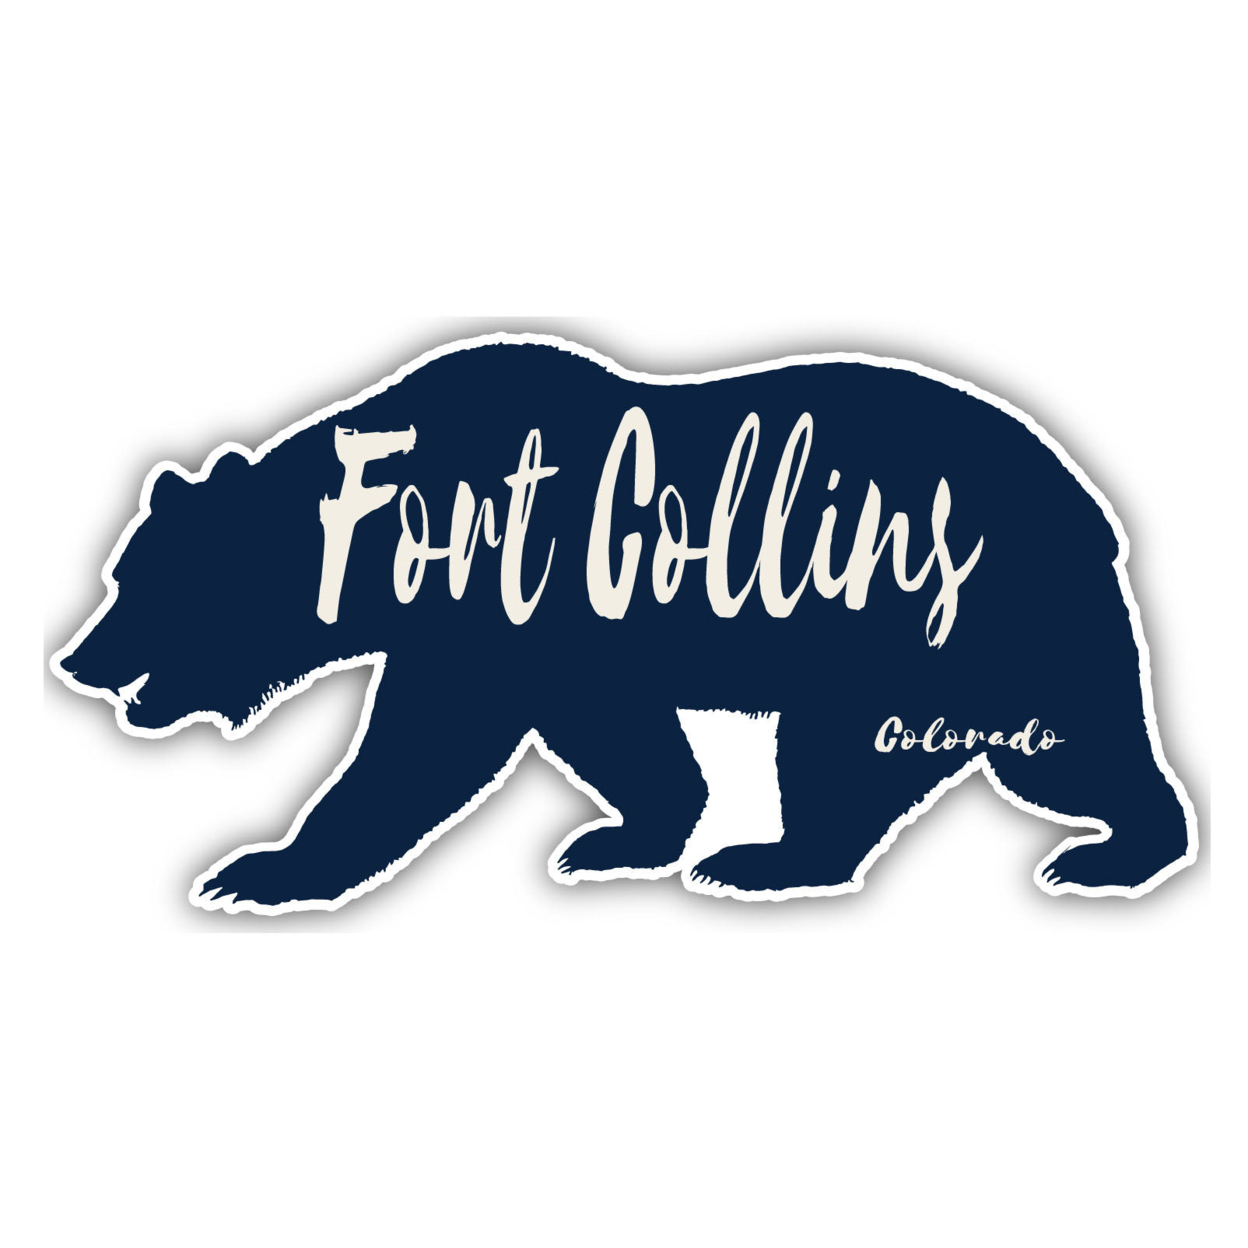 Fort Collins Colorado Souvenir Decorative Stickers (Choose Theme And Size) - 4-Pack, 4-Inch, Bear